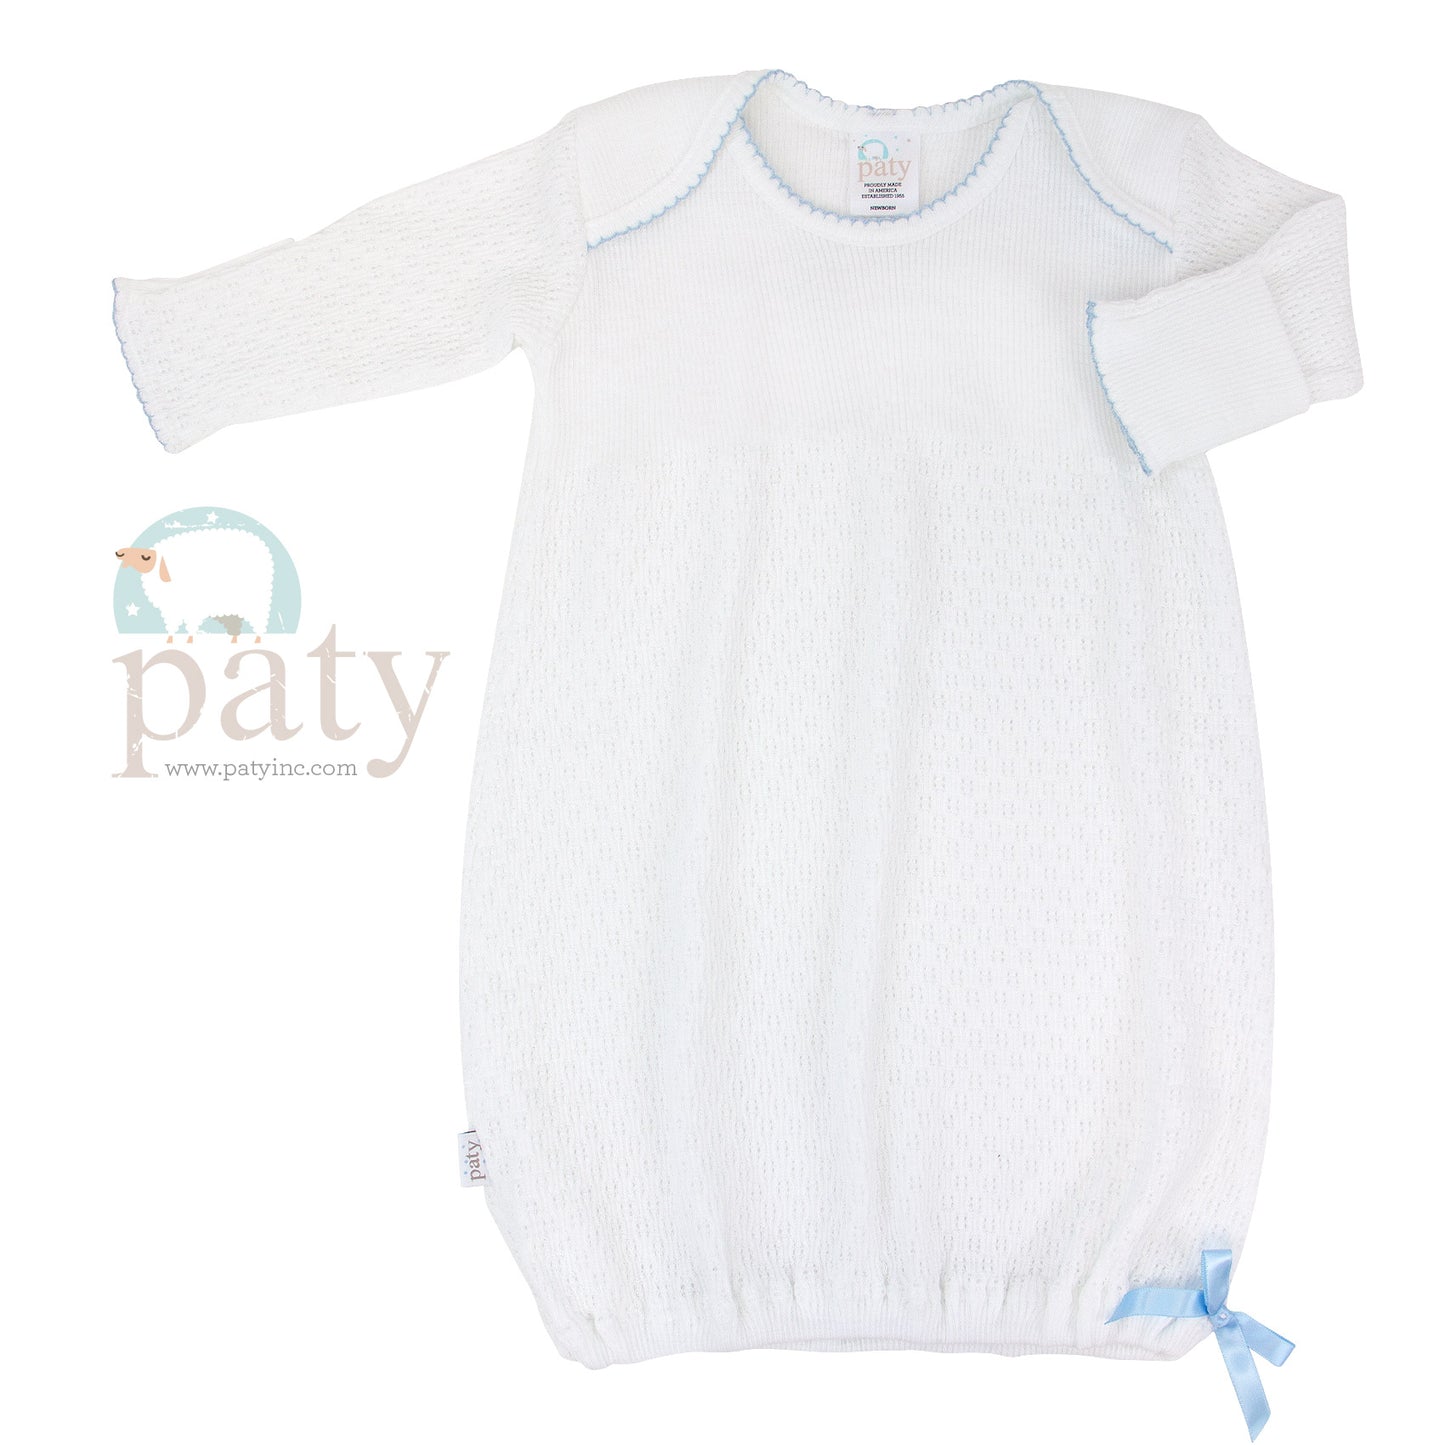 A white Paty baby gown with blue trim, featuring a Signature Paty Gown design for easy-access and made from handmade patented fabric.